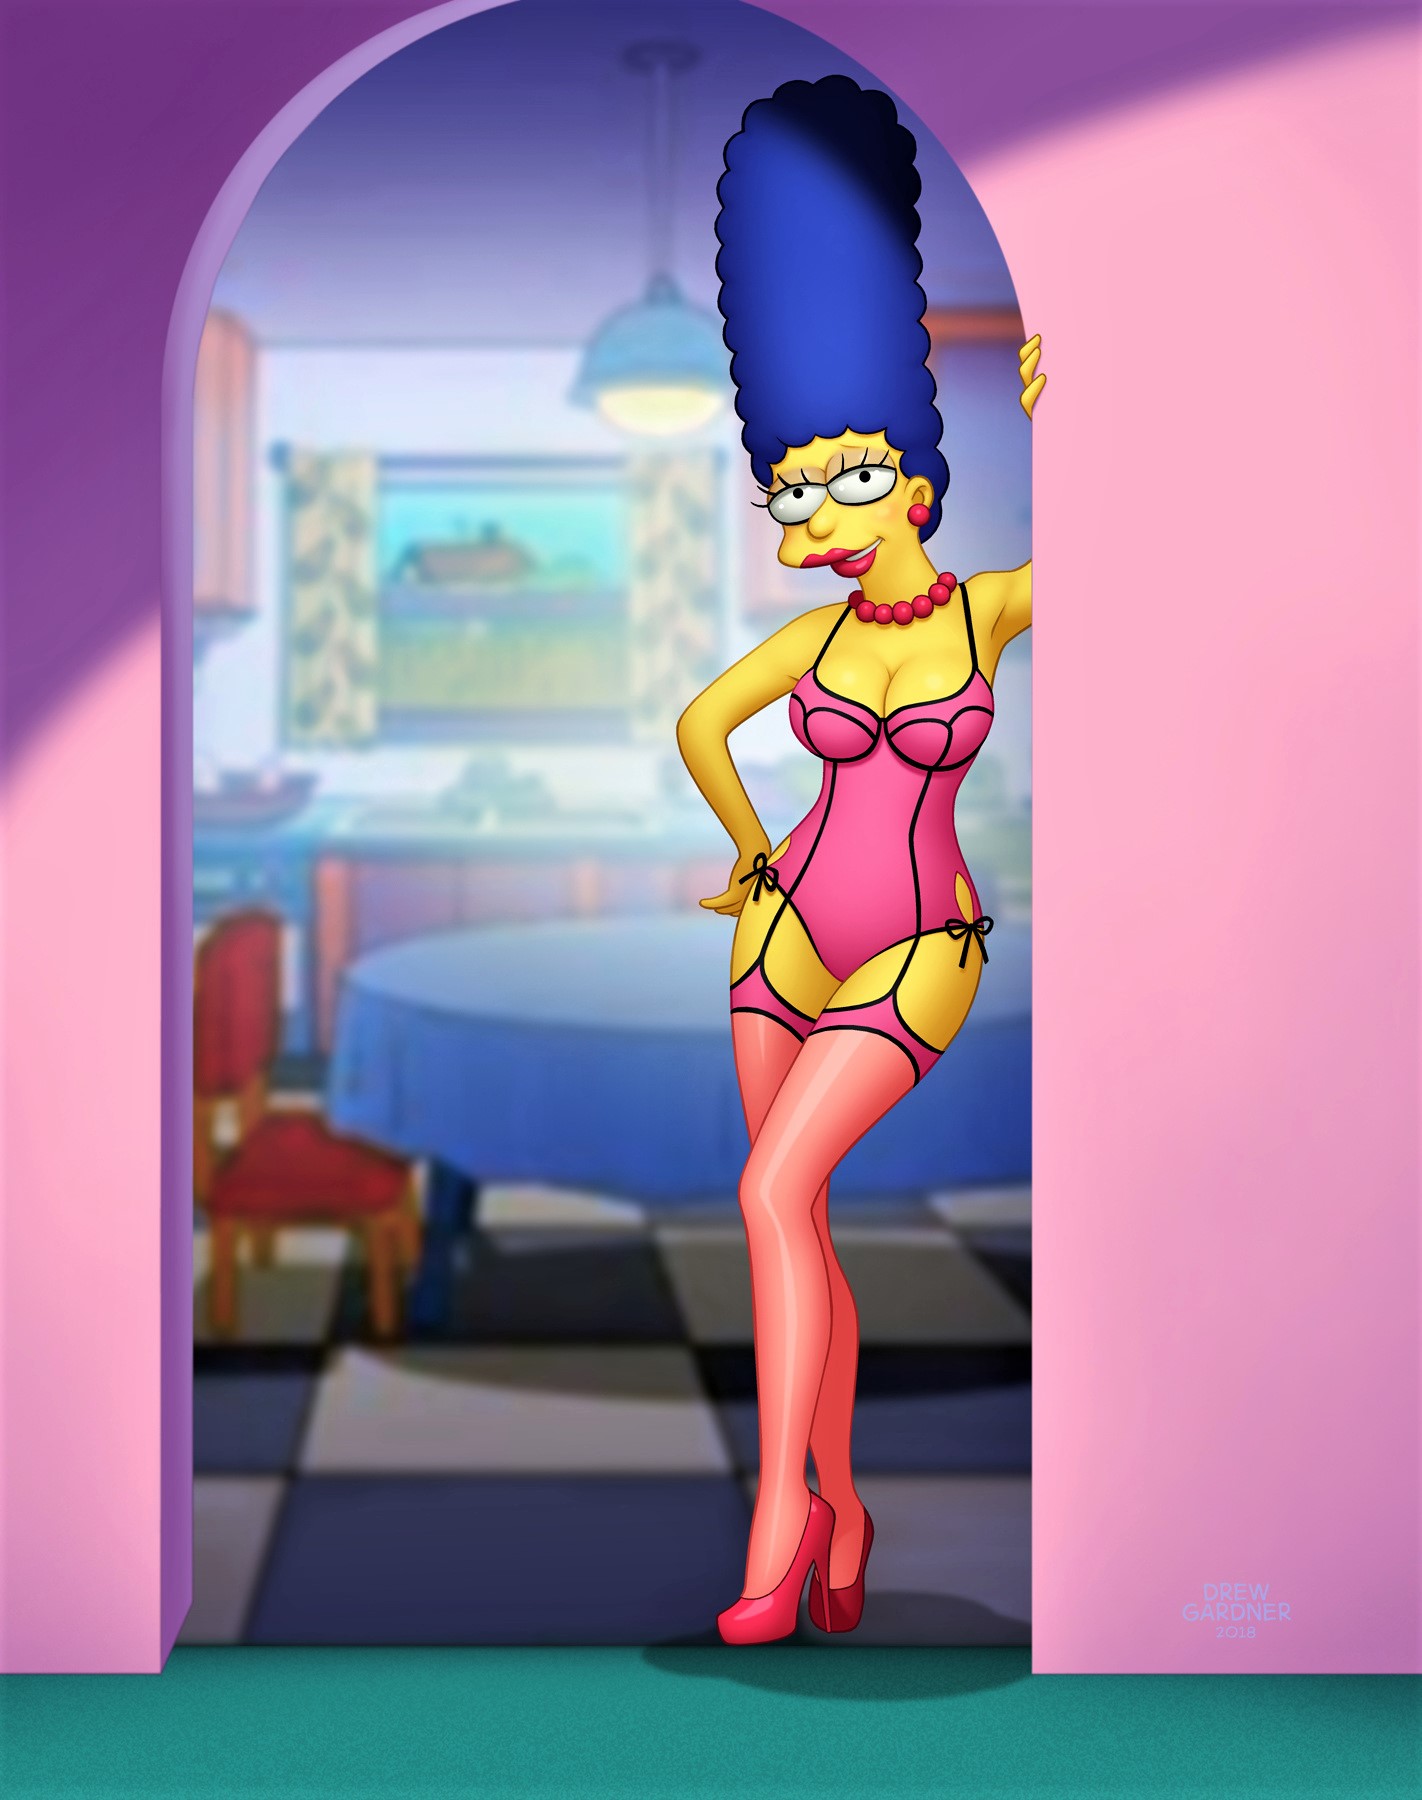 Marge simpsons nackt in stockings.